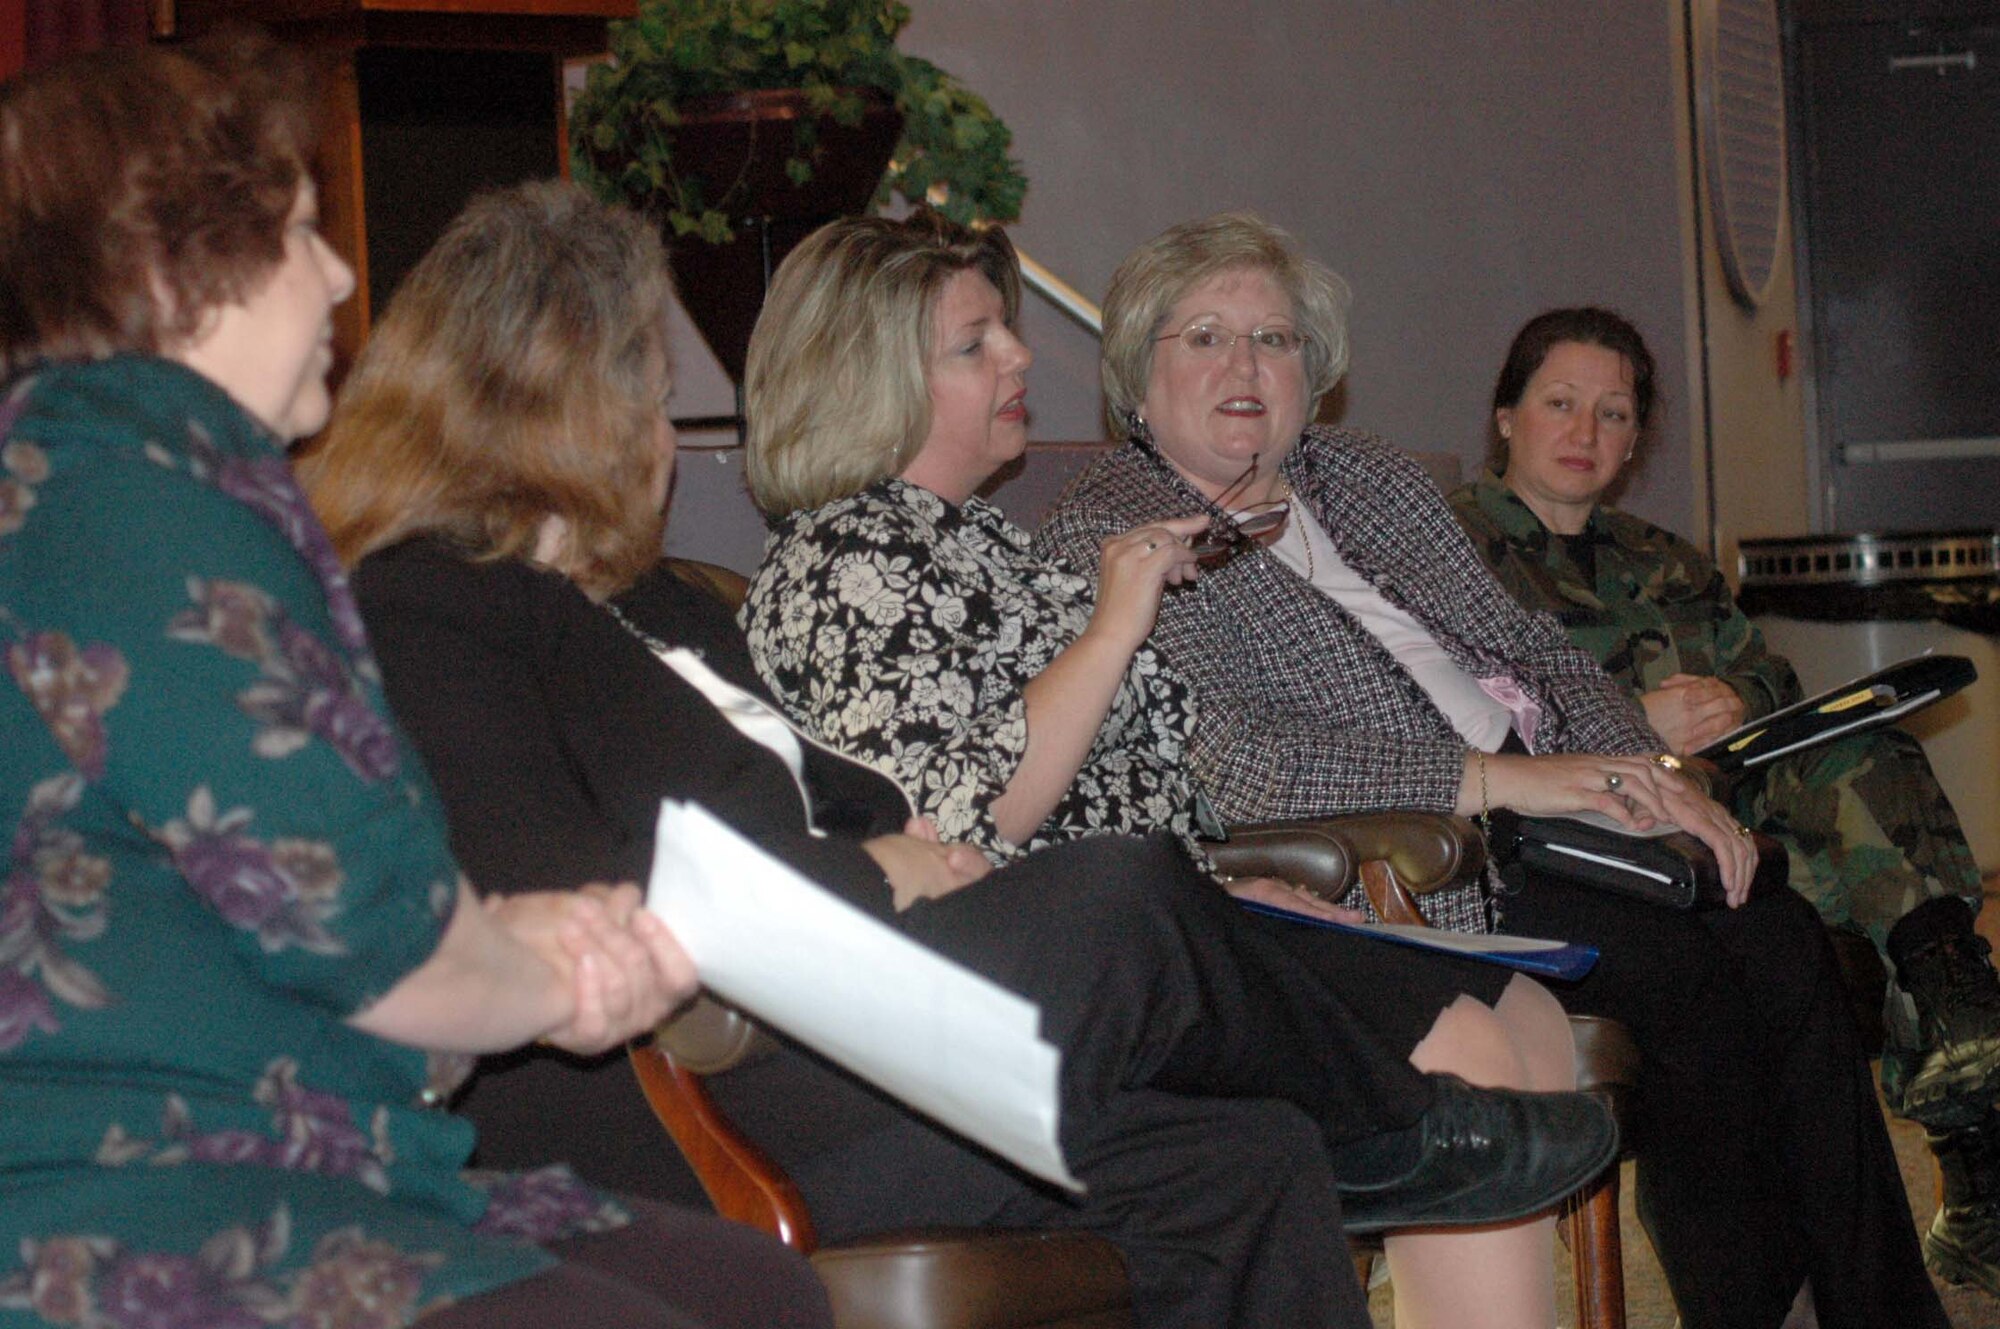 Shelbie Purser, center, speaks at the senior leadership panel discussion Wednesday. The discussion was one of the Women's History Month events. The finale of the month-long celebration will be a luncheon Thursday in the officers’ club ballroom from 11:30 a.m to 1 p.m. U.S. Air Force photo by Sue Sapp 